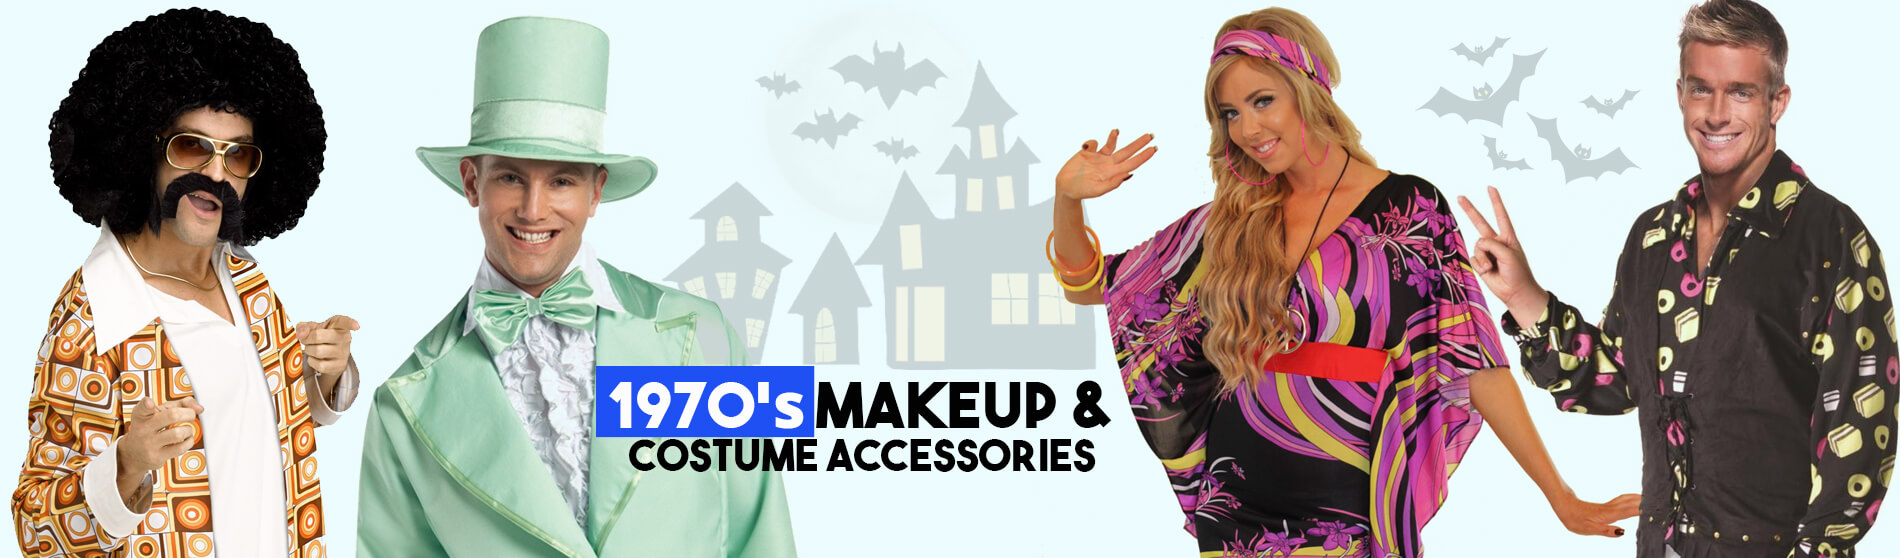 Glendale Halloween : 70-Costume-Accessories-and-Makeup